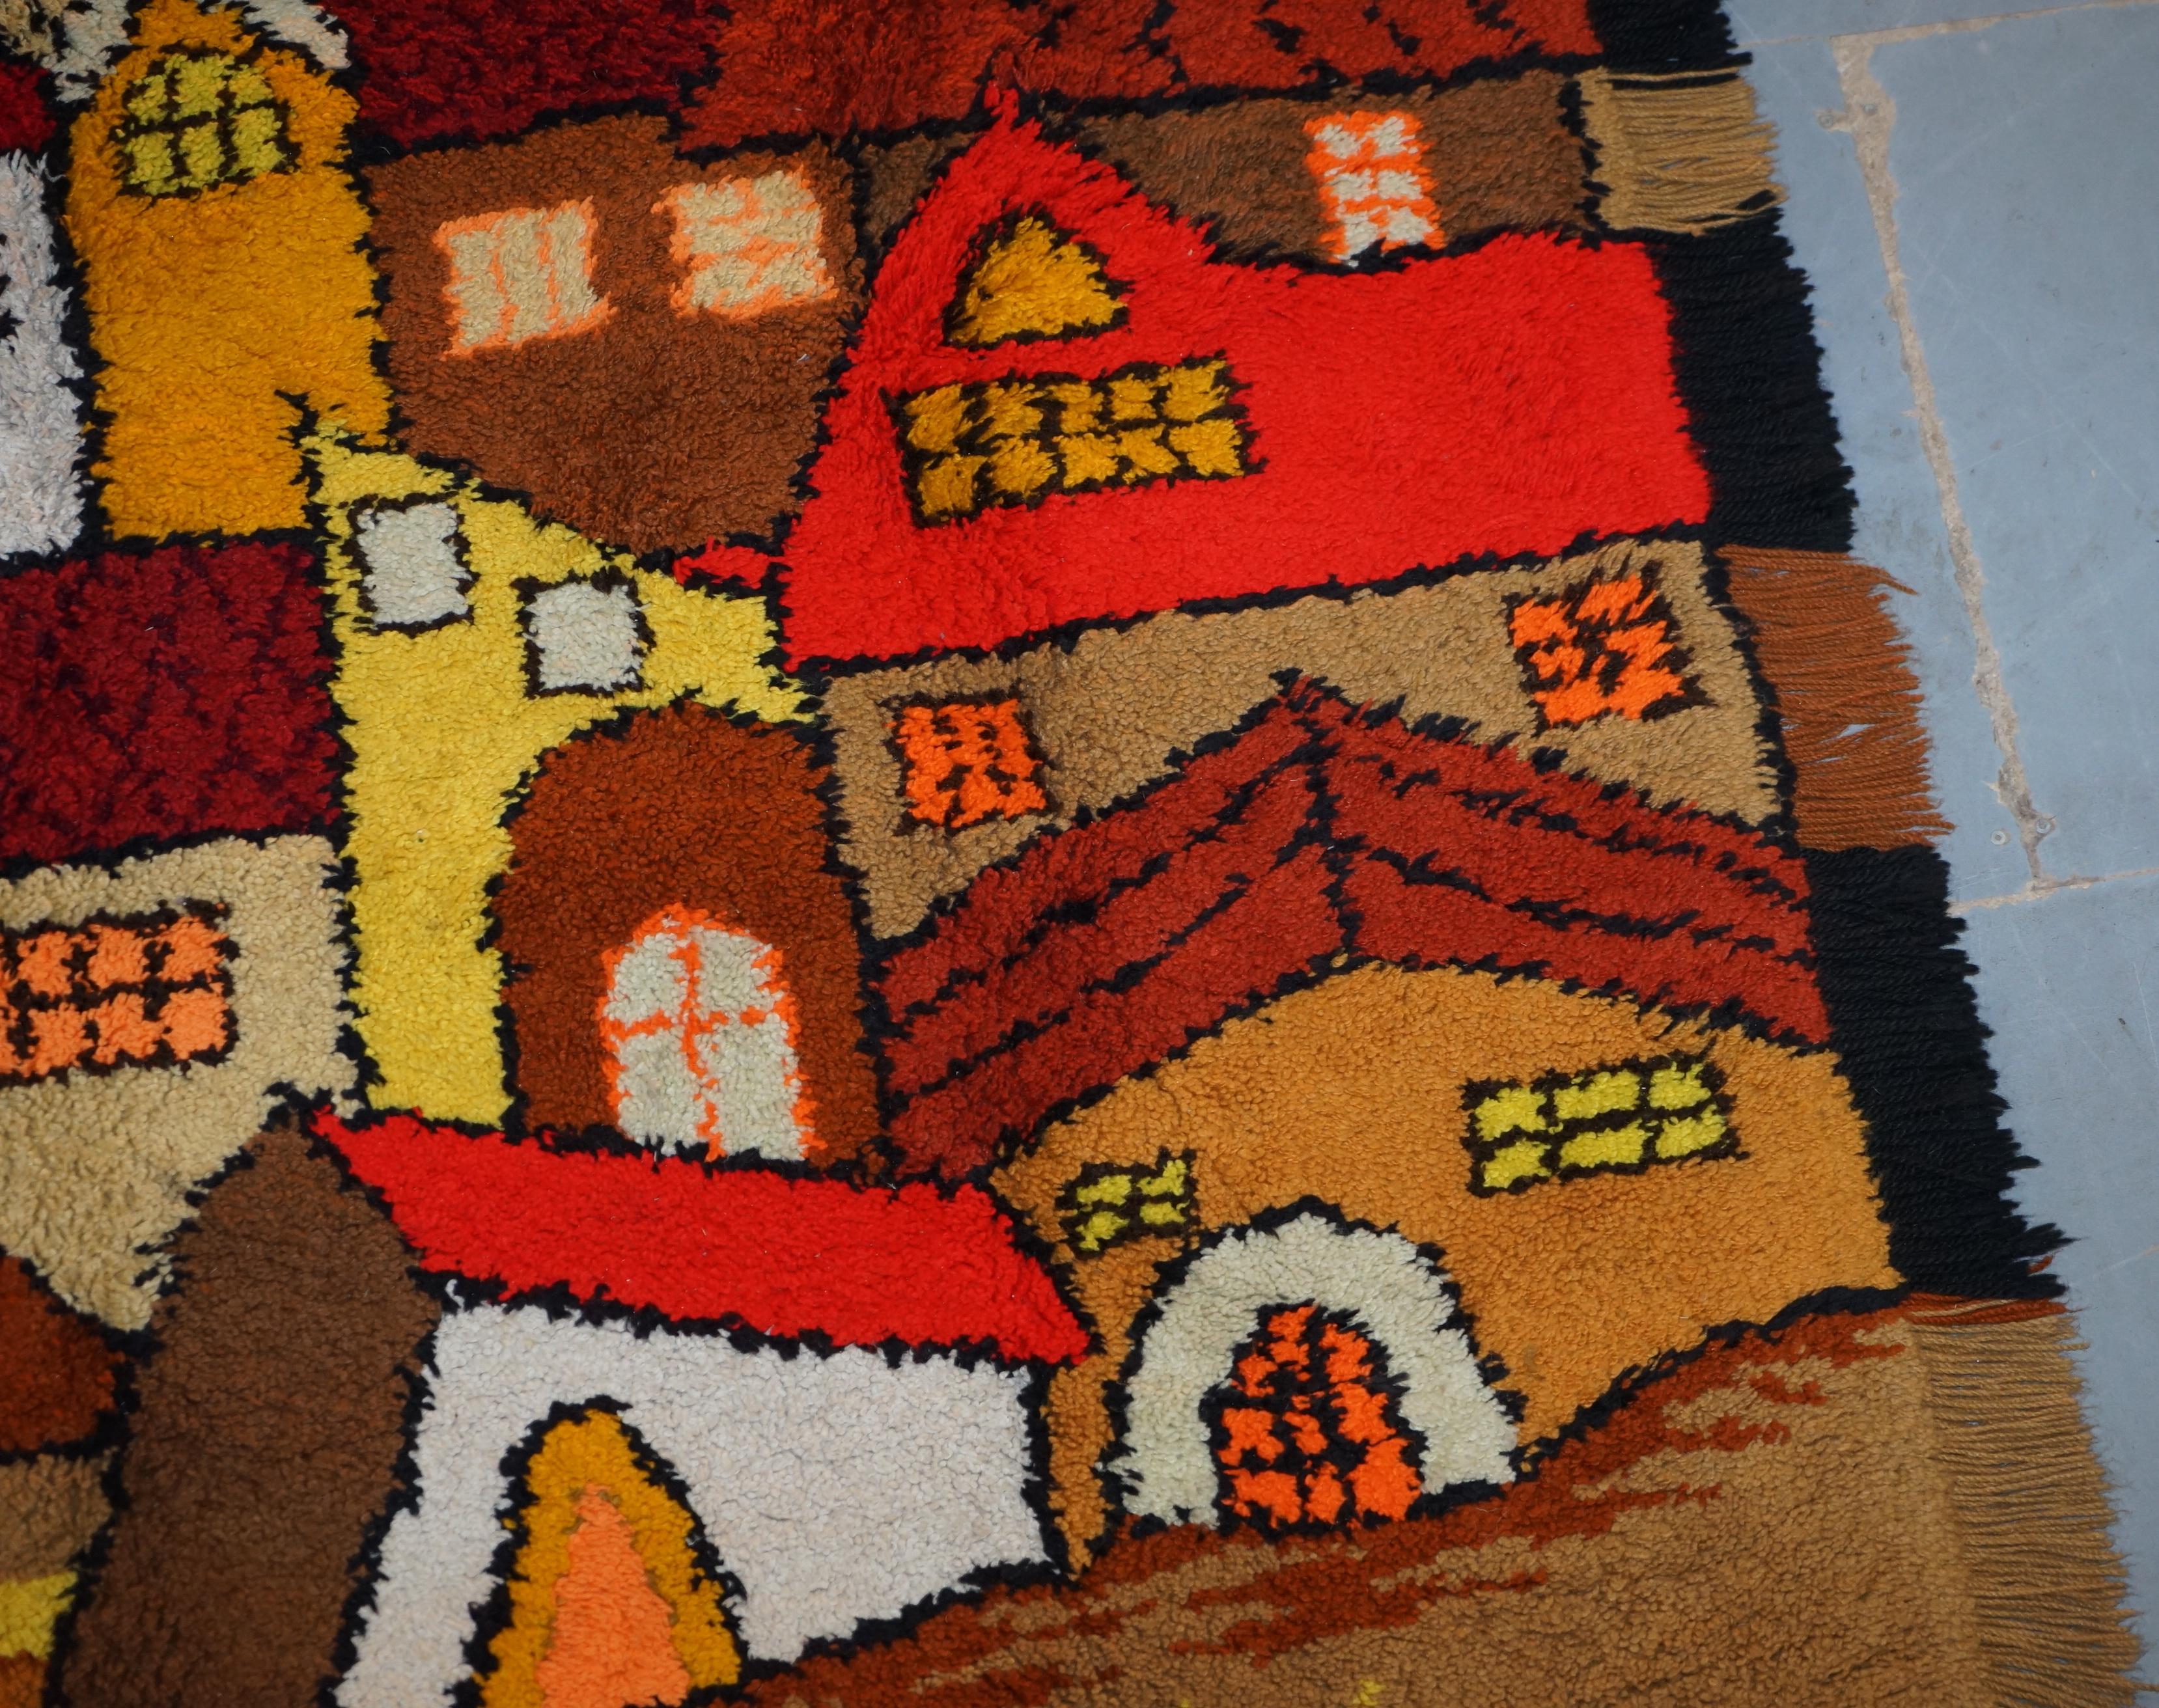 Hand-Crafted Stunning Large Shag Pile Rug Depicting Houses in the Style of L.S Lowry For Sale